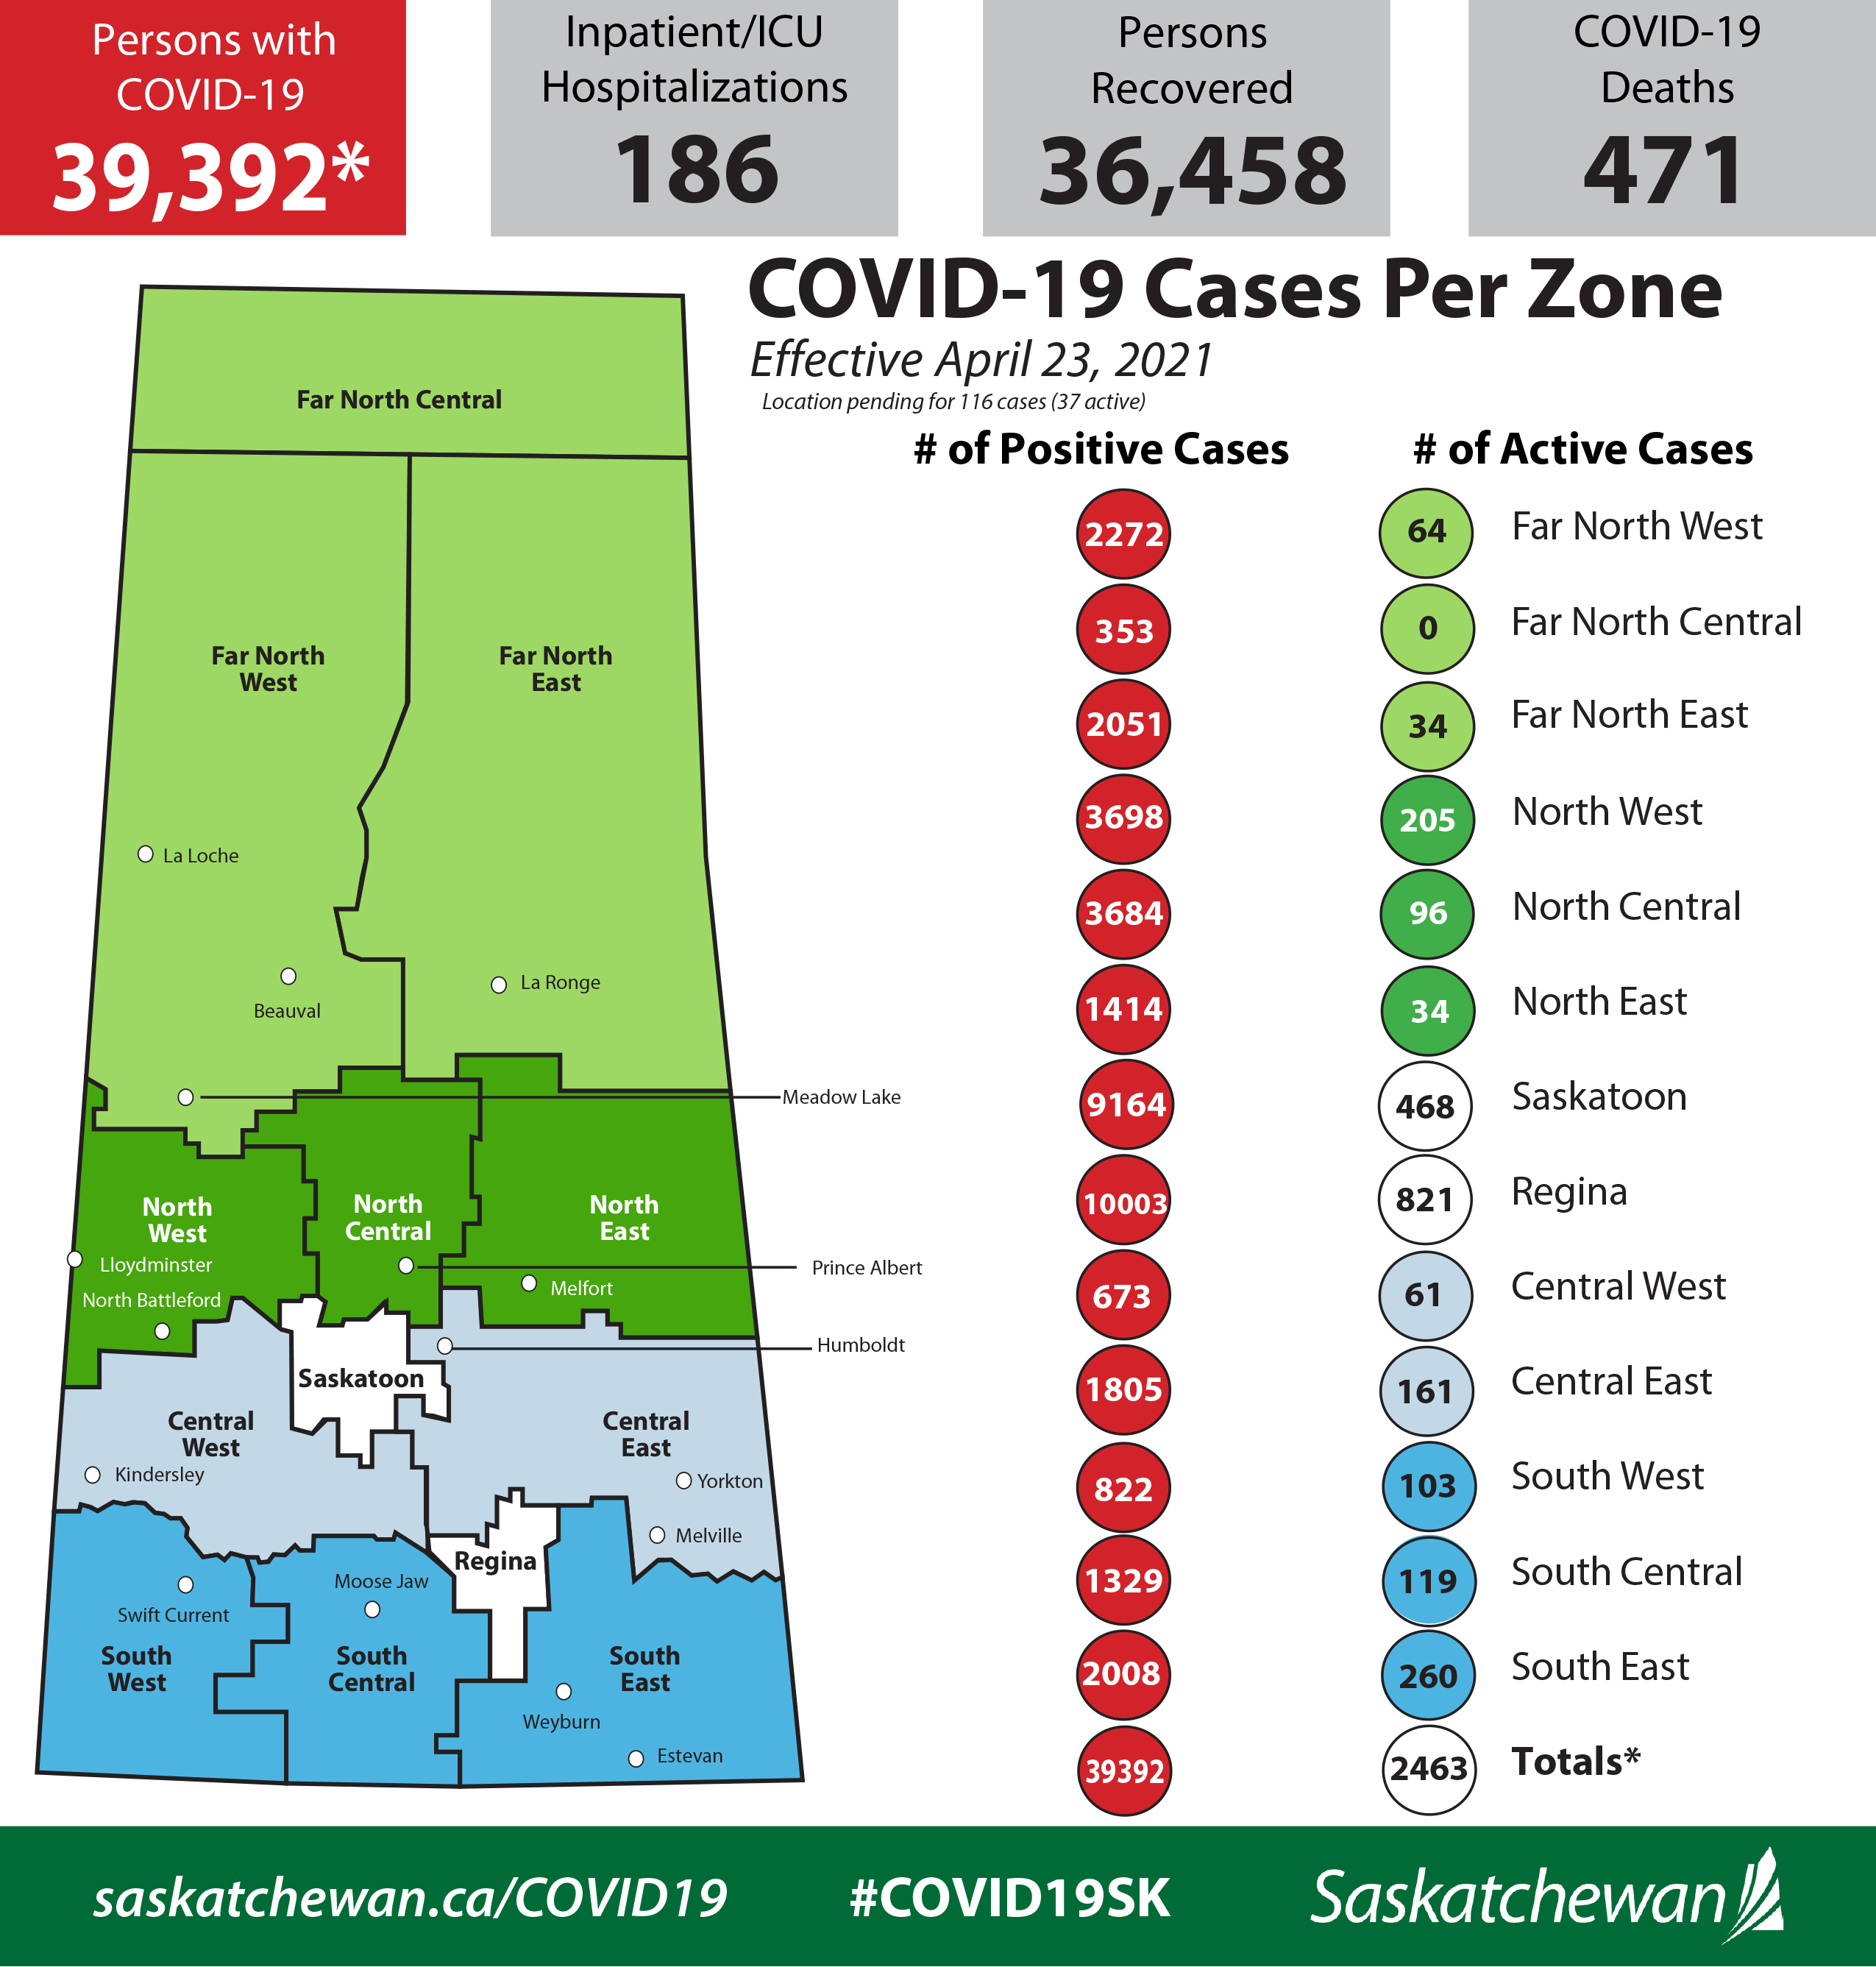 COVID-19 Update for April 23: 382,135 Vaccines Administered, 245 New Cases, 296 Recoveries, 186 in Hospital, One New Death Current 7-Day Average: 251 (20.5 per 100,000). Full details: https://www.saskatchewan.ca/government/news-and-media/2021/april/23/covid19-update-for-april-23-382135-vaccines-administered-245-new-cases-296-recoveries-one-new-death COVID-19 Dashboard: https://dashboard.saskatchewan.ca/health-wellness